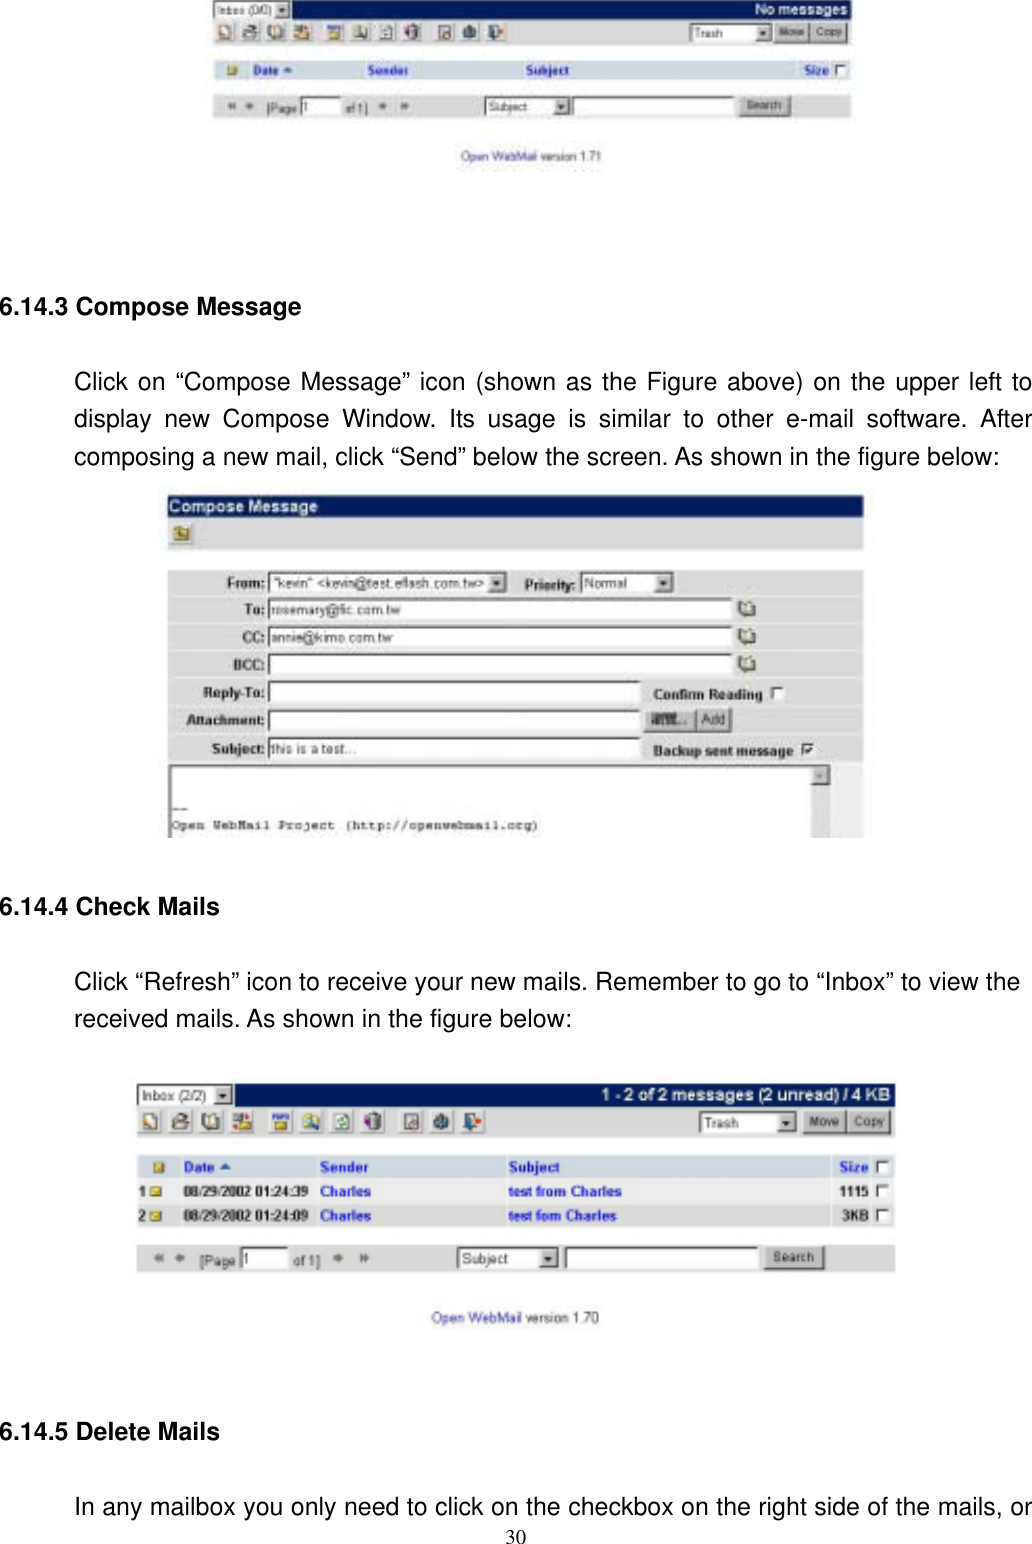  30       6.14.3 Compose Message Click on “Compose Message” icon (shown as the Figure above) on the upper left to display new Compose Window. Its usage is similar to other e-mail software. After composing a new mail, click “Send” below the screen. As shown in the figure below:  6.14.4 Check Mails   Click “Refresh” icon to receive your new mails. Remember to go to “Inbox” to view the received mails. As shown in the figure below:    6.14.5 Delete Mails In any mailbox you only need to click on the checkbox on the right side of the mails, or 